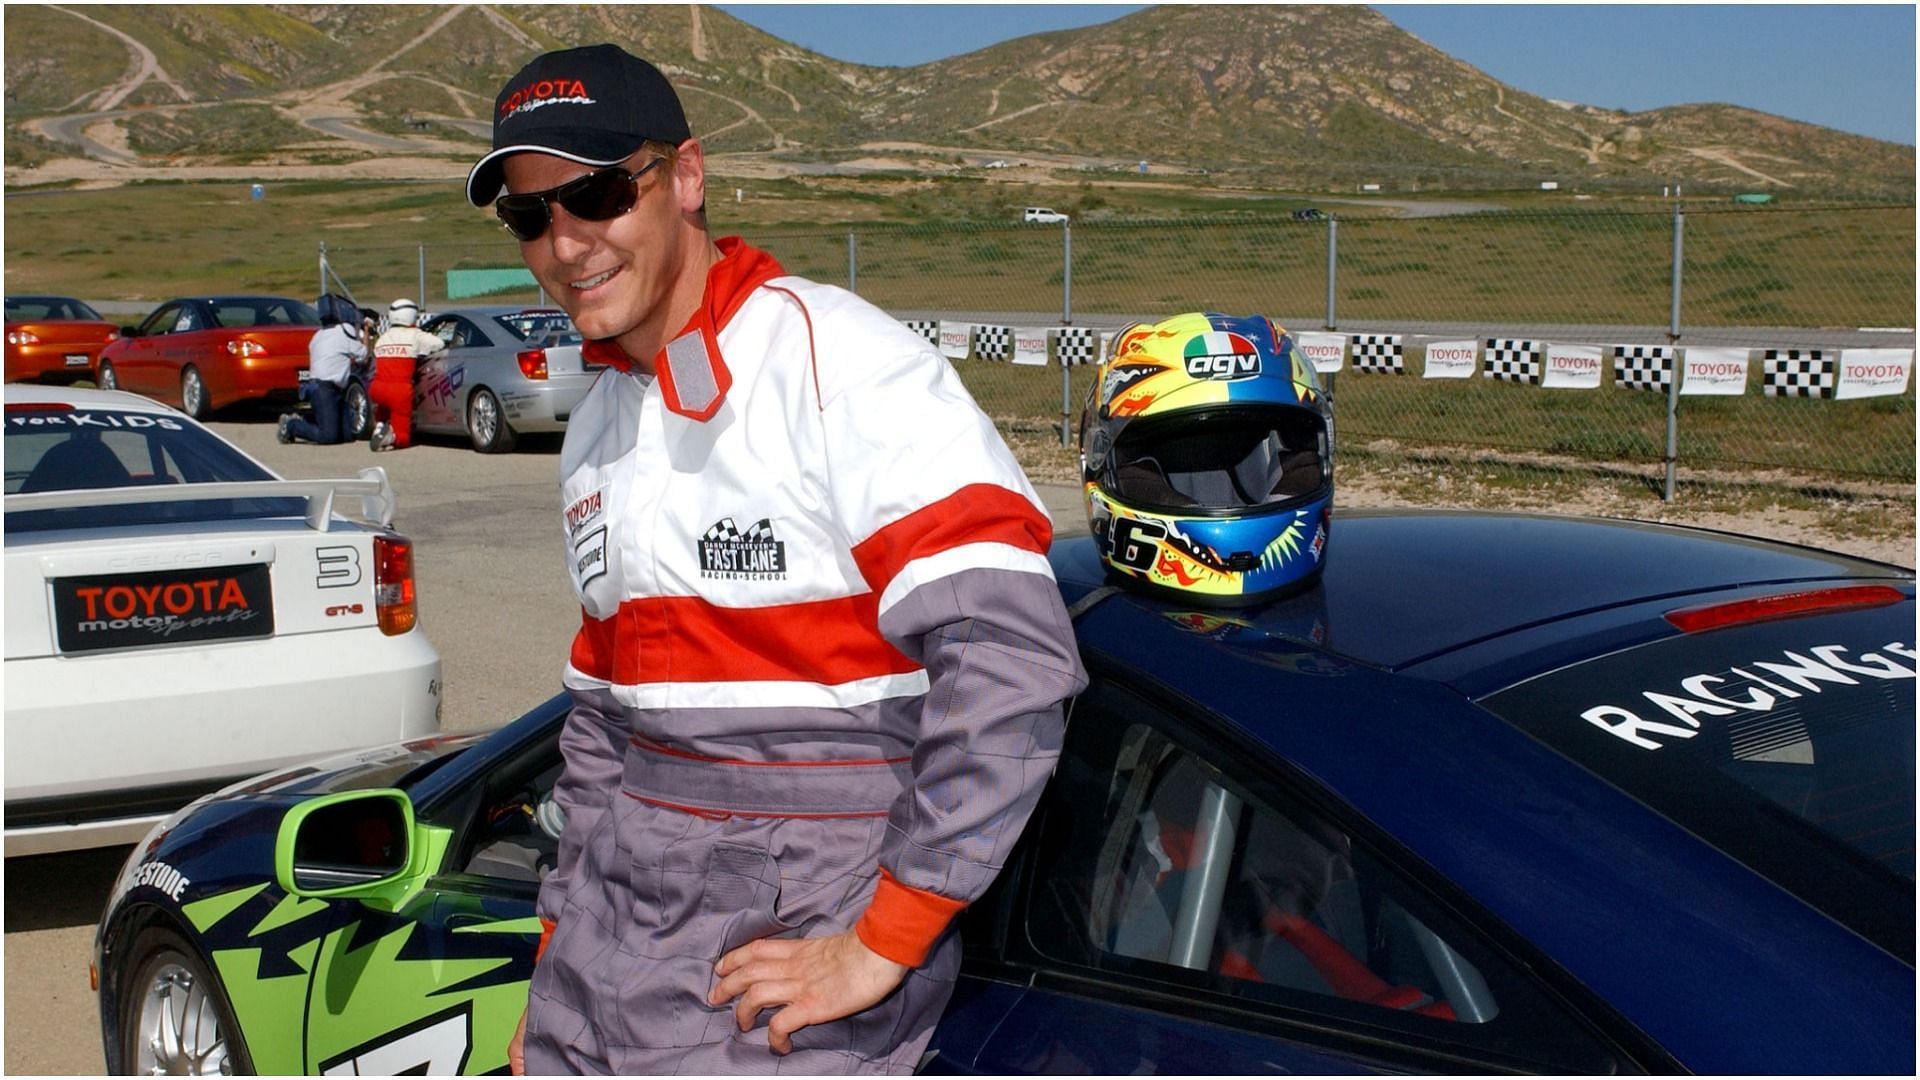 Ingo Rademacher during 2005 Toyota Pro/Celebrity Race Driver Training at Willow Springs International Raceway in Rosamond, California, United States (Image via Getty Images)